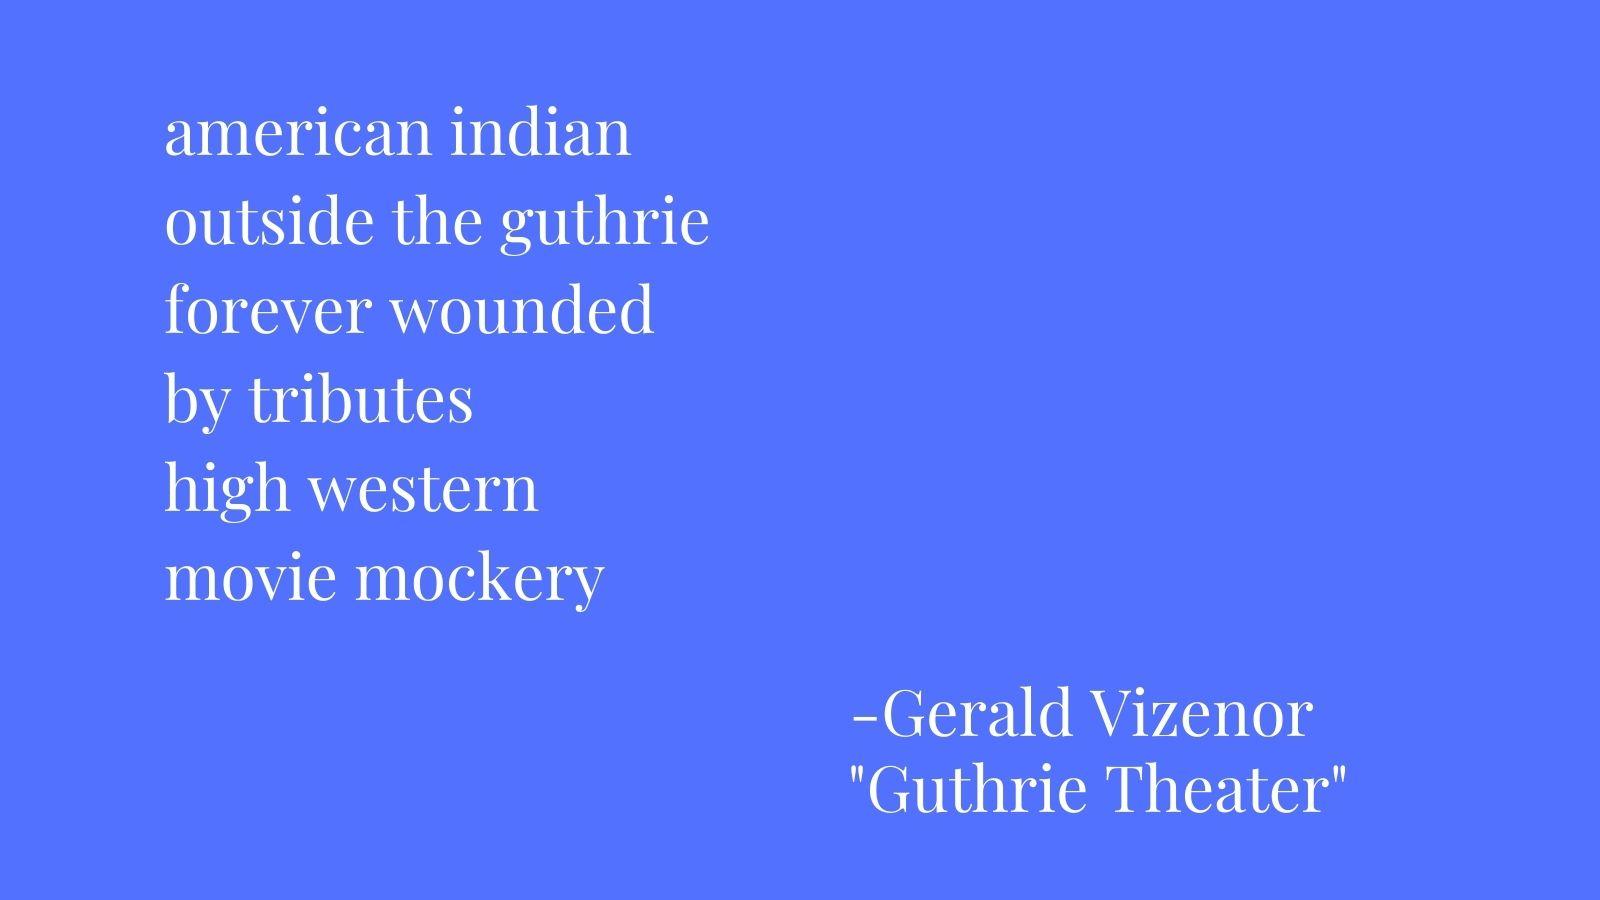 american indian outside the guthrie forever wounded by tributes high western movie mockery